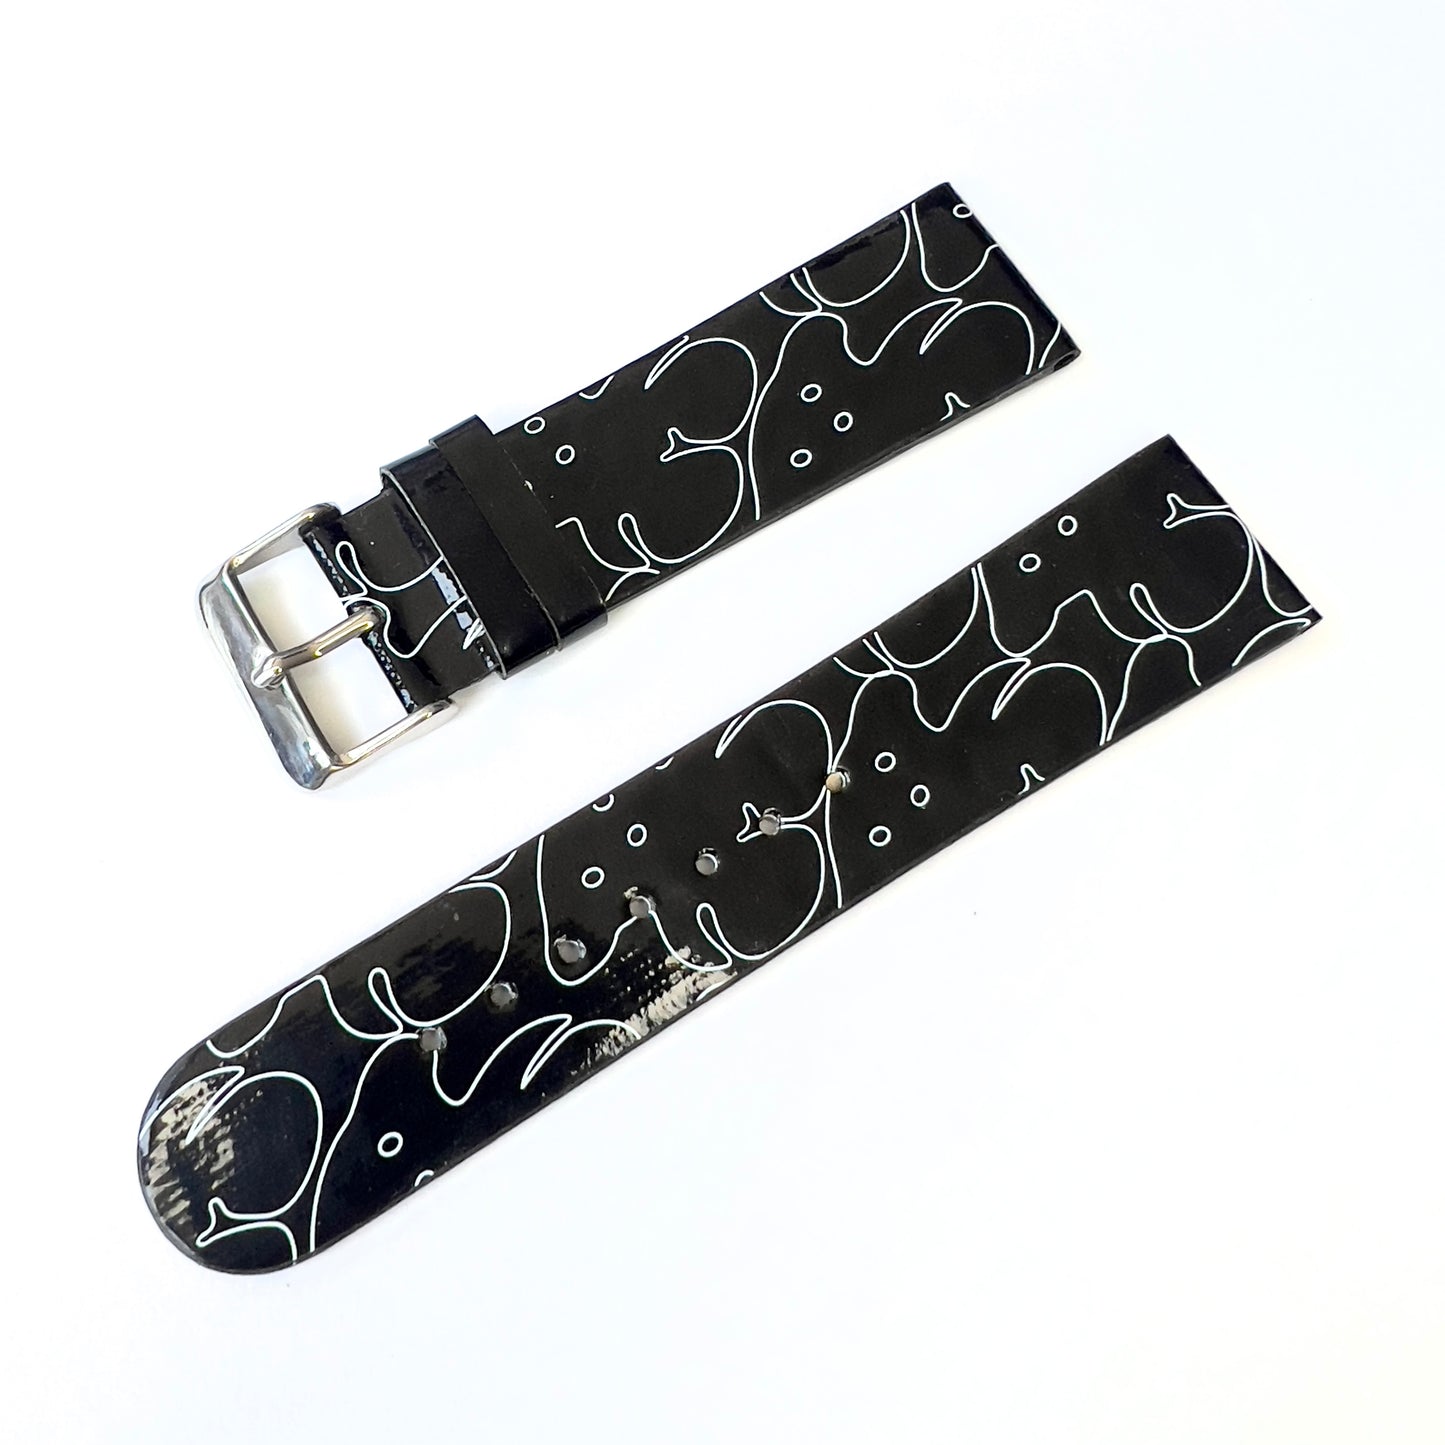 22mm/20mm Black Patent Leather Strap Band with Silver Tone Buckle